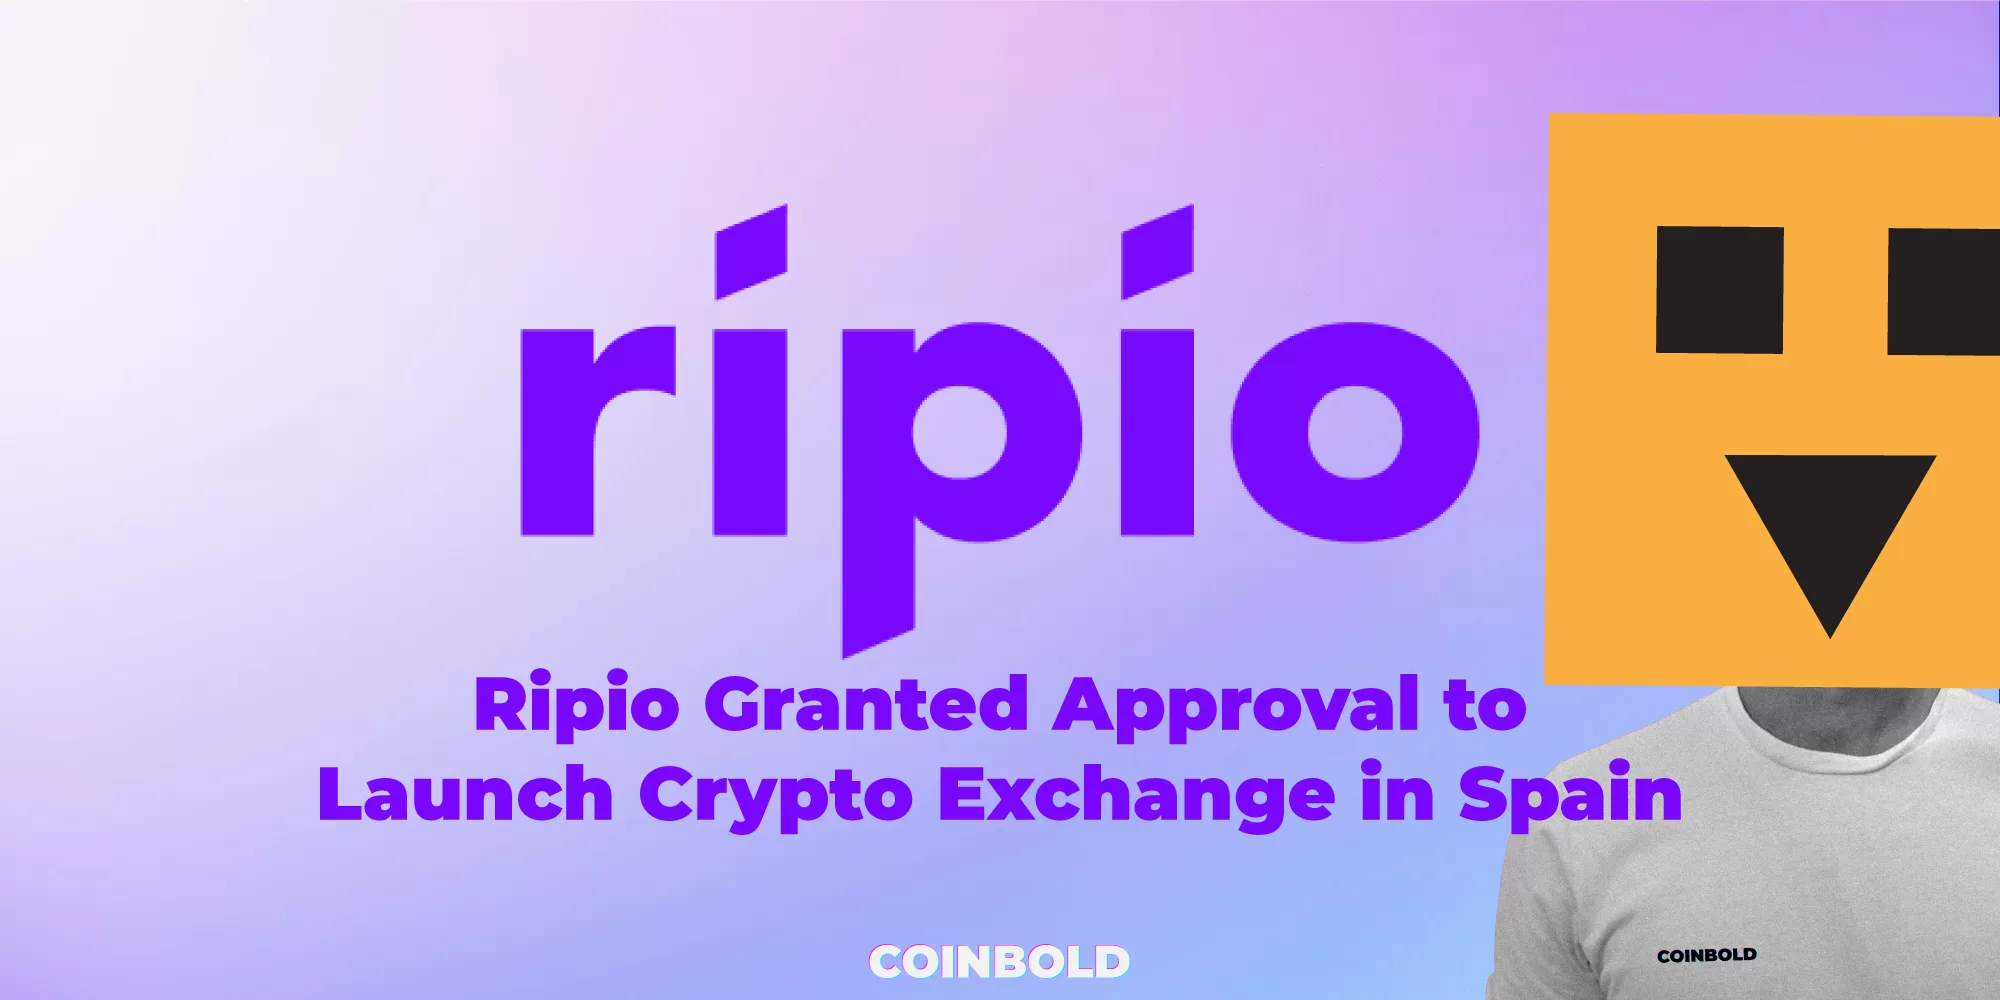 Ripio Granted Approval to Launch Crypto Exchange in Spain